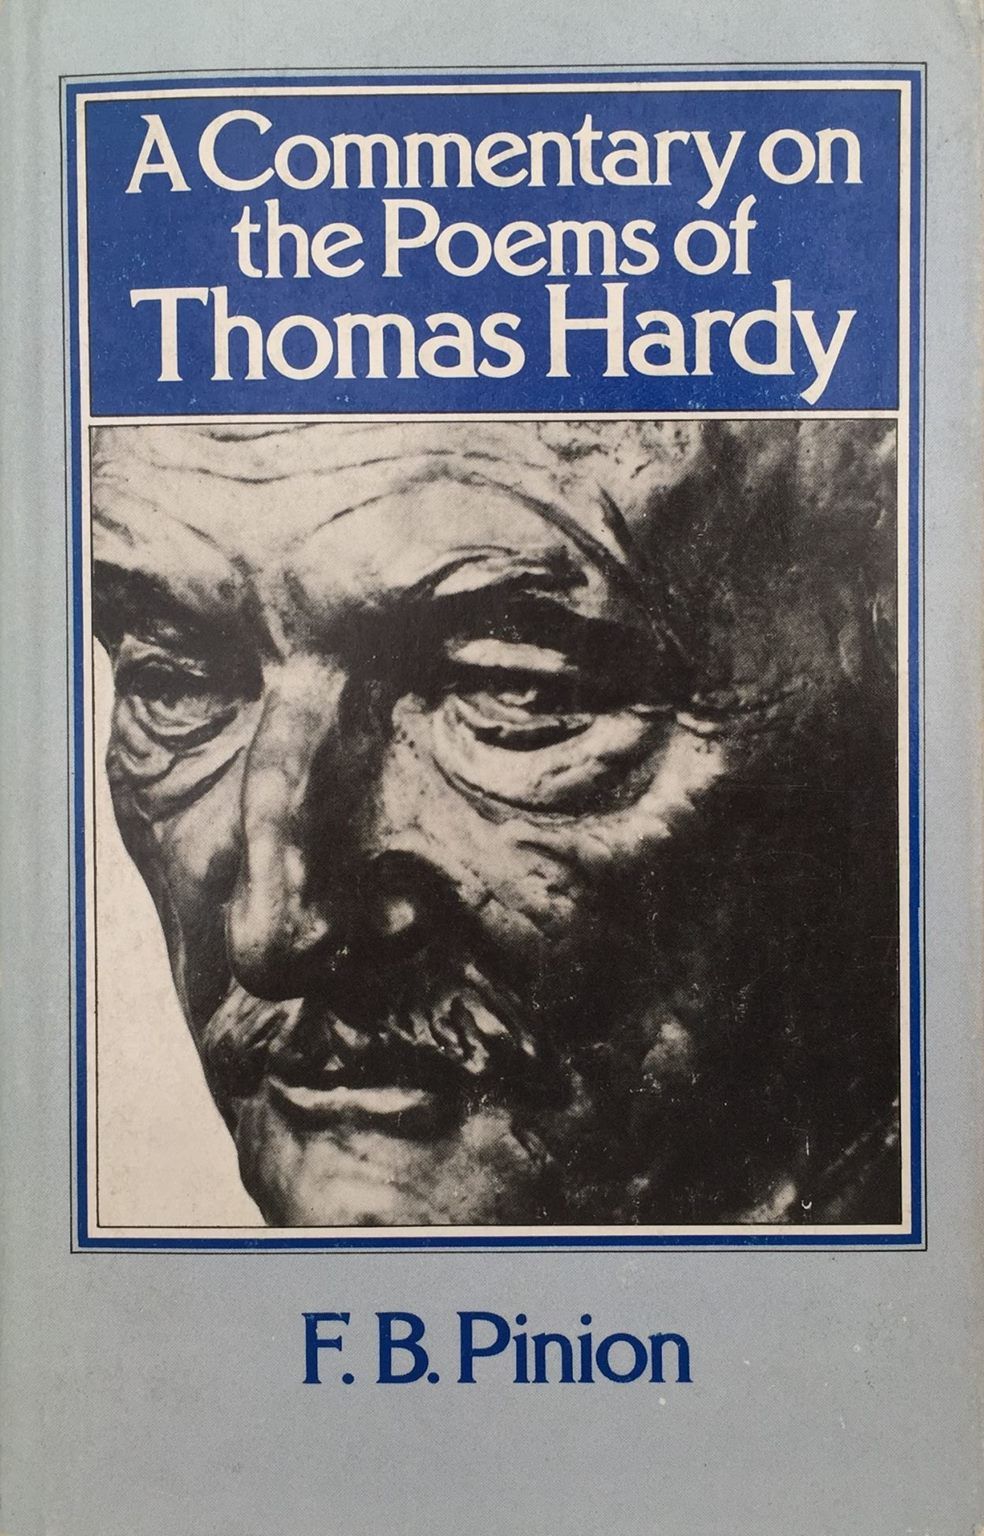 A Commentary on the Poems of Thomas Hardy